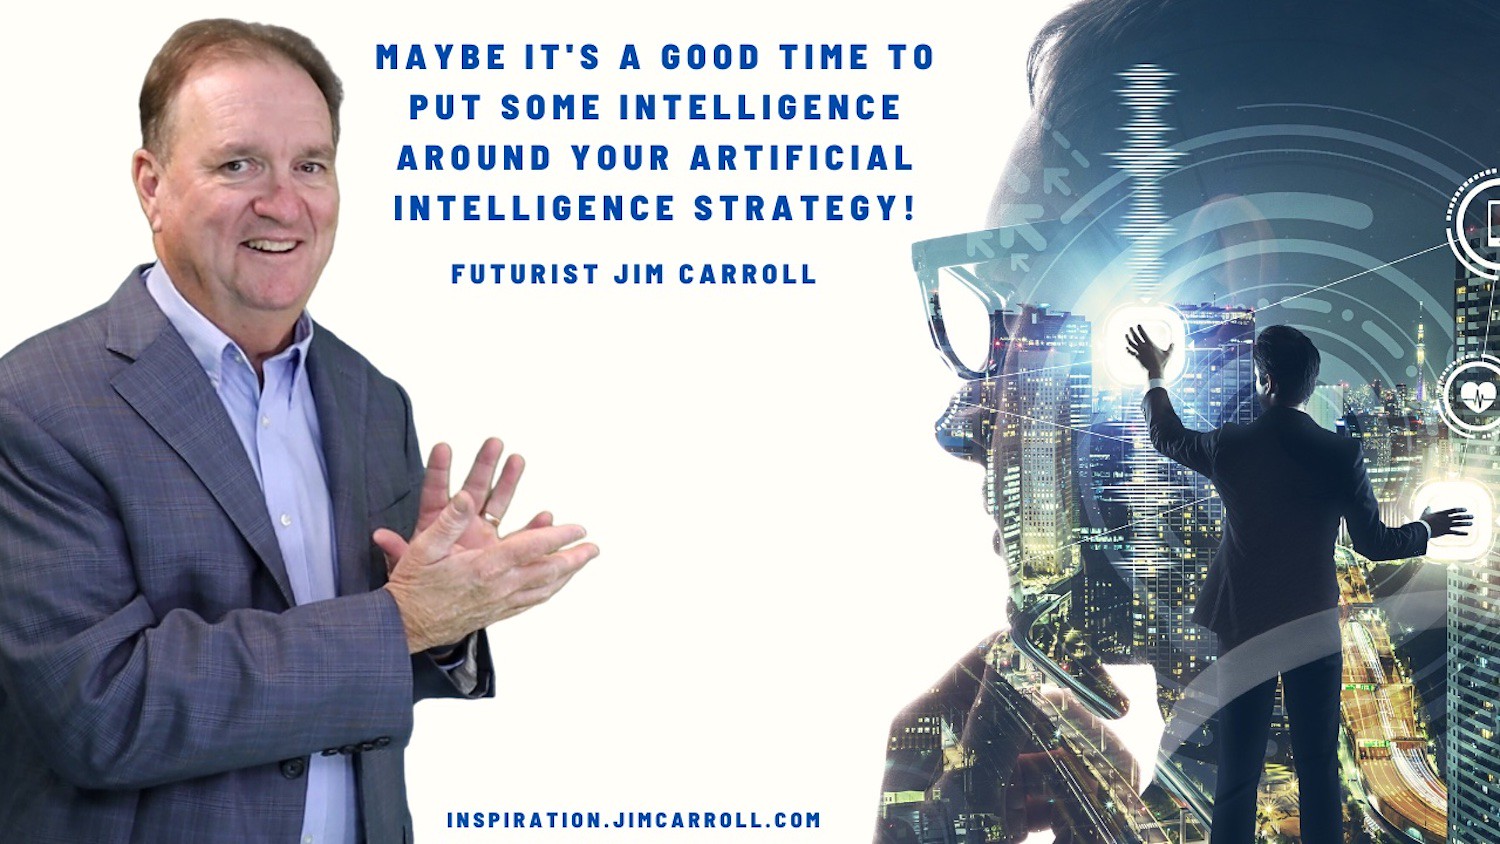 "Maybe it's a good time to put some intelligence around your artificial intelligence strategy!" - Futurist Jim Carroll